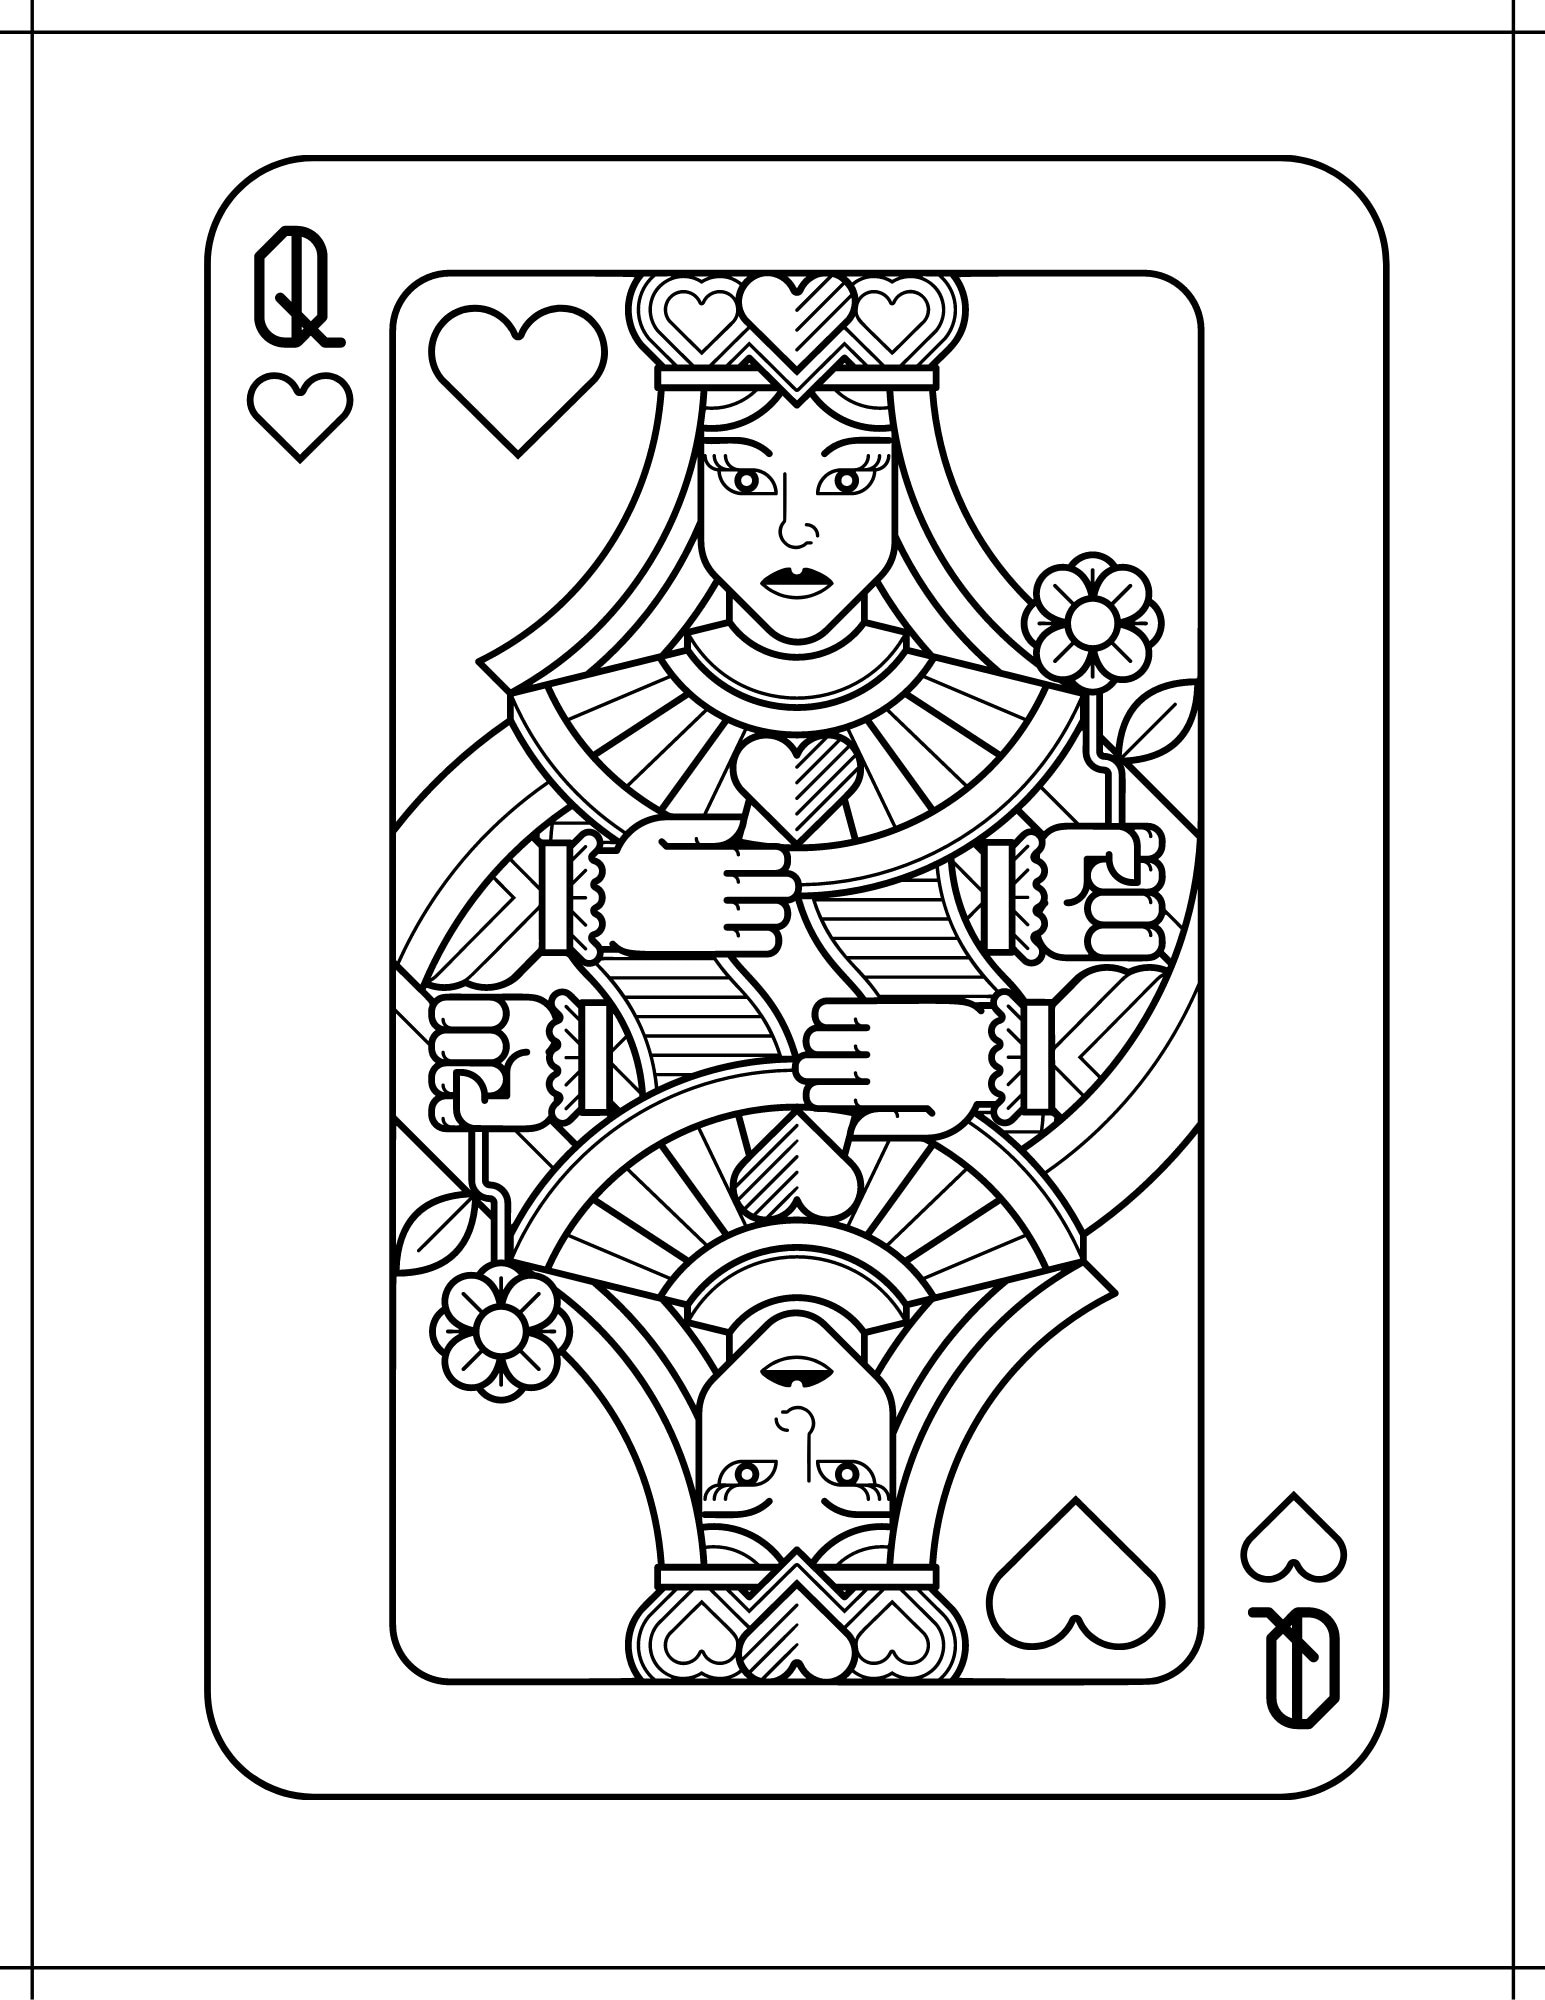 Face cards coloring pages plusface cards to colorplaying cardscard games for kids instant download